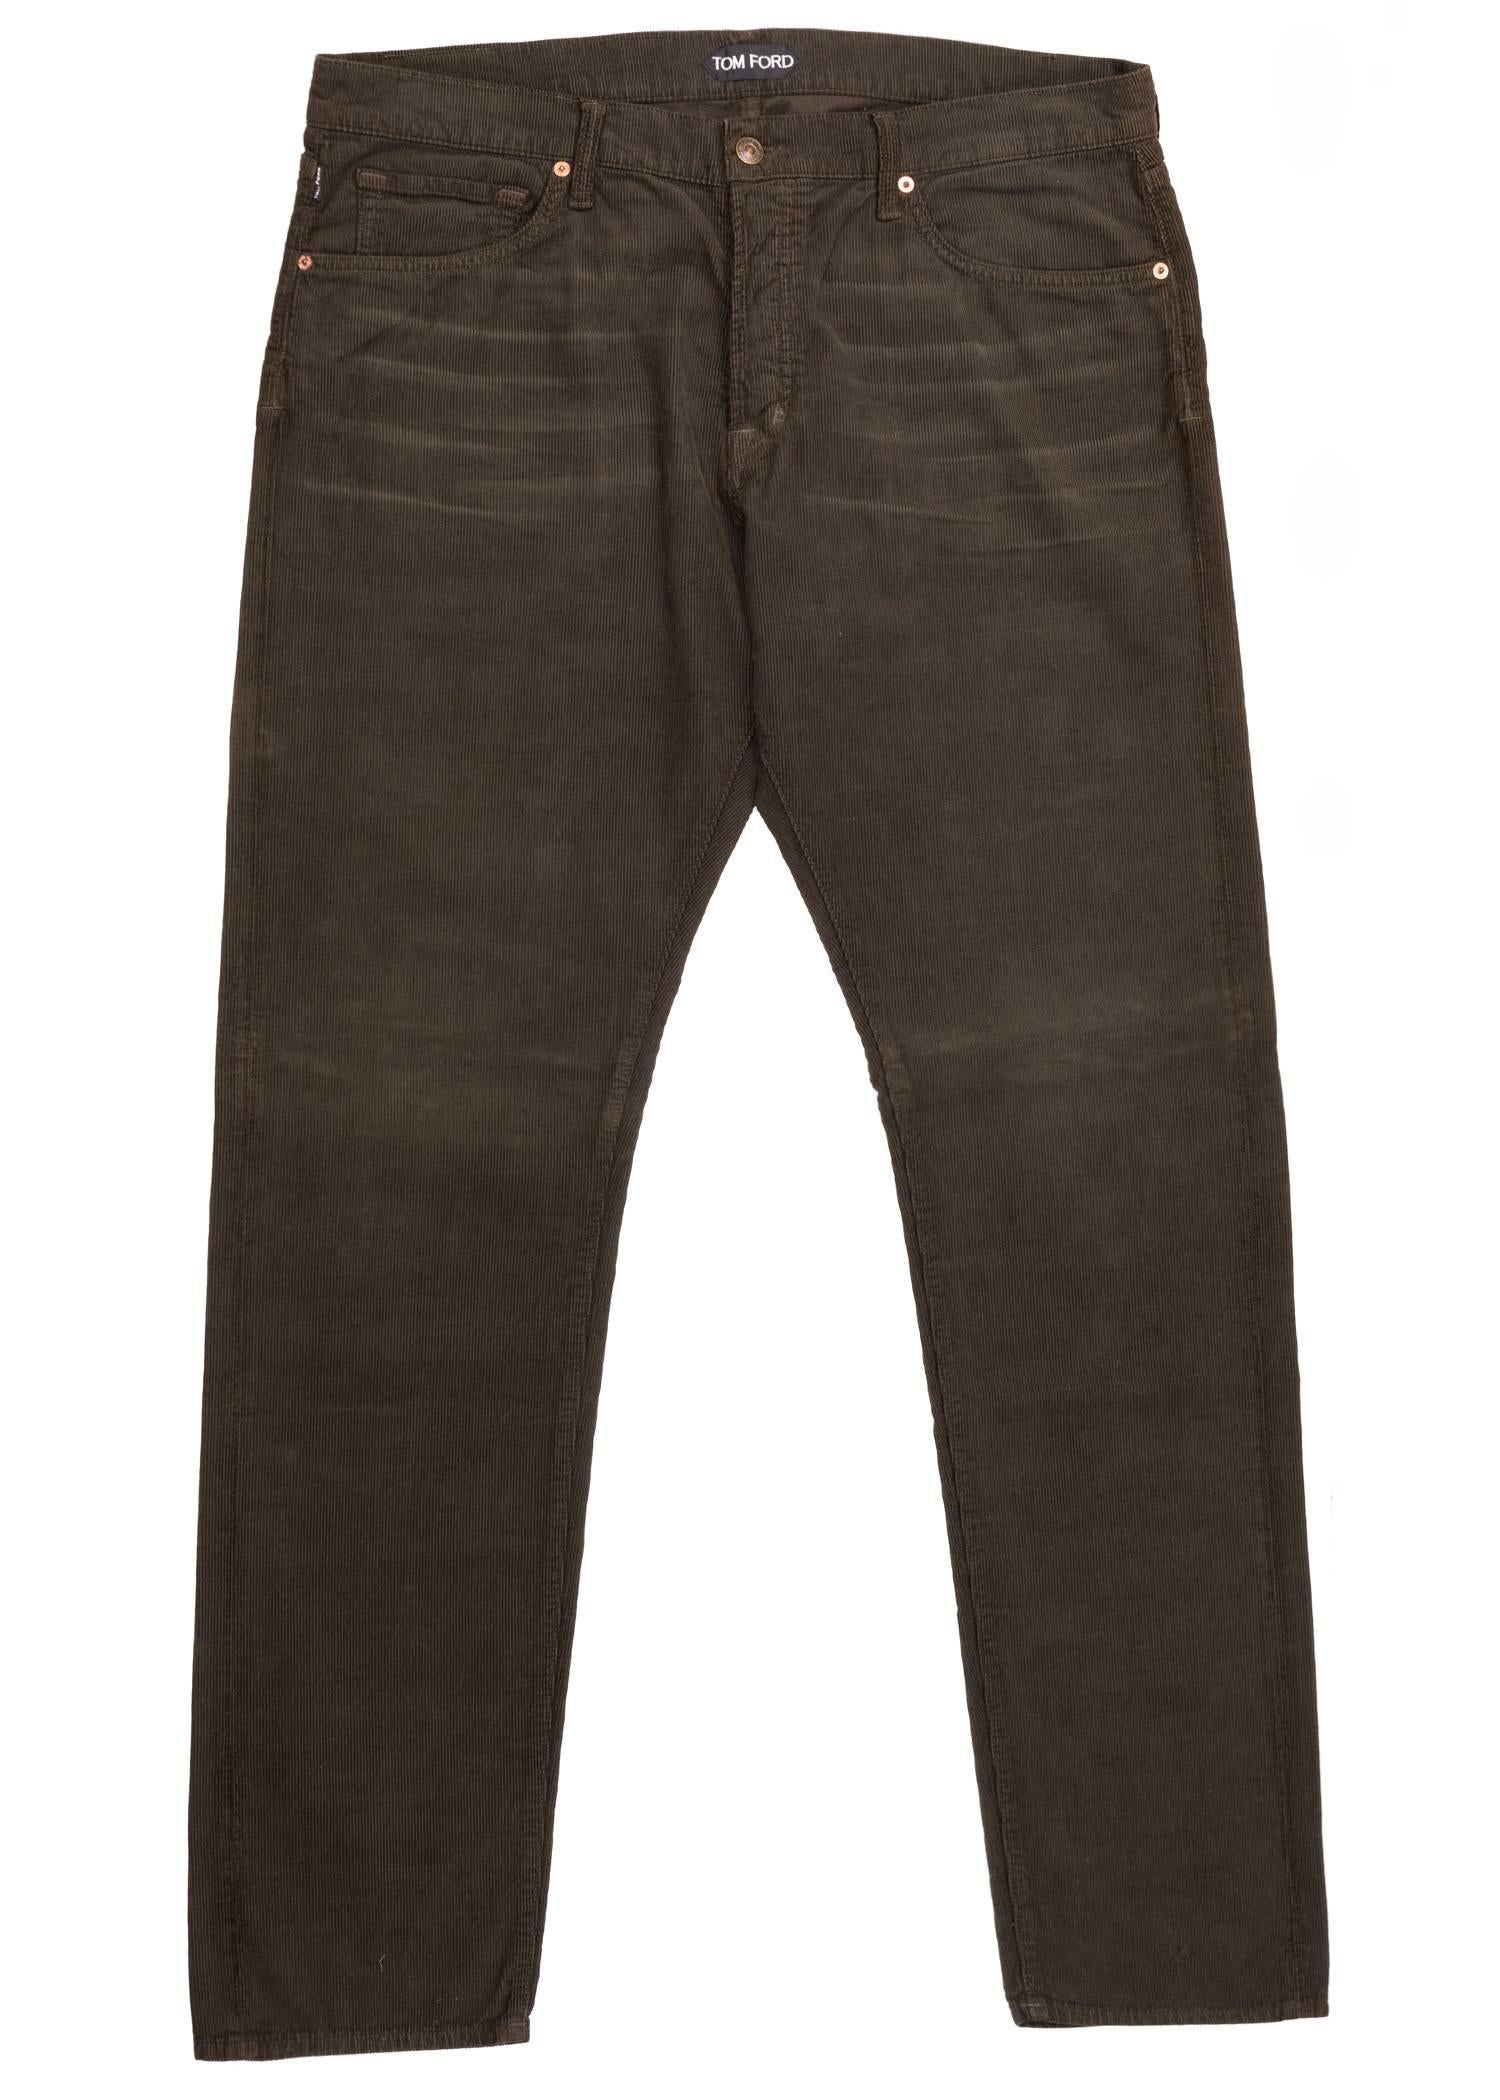 You can always rely on your Tom Ford Corduroy Jeans for the occasion. This timeless pair was designed using durable corduroy cotton, a regular fit, and a five button front fly design. Pair these jeans with a slouchy white top for the perfect all